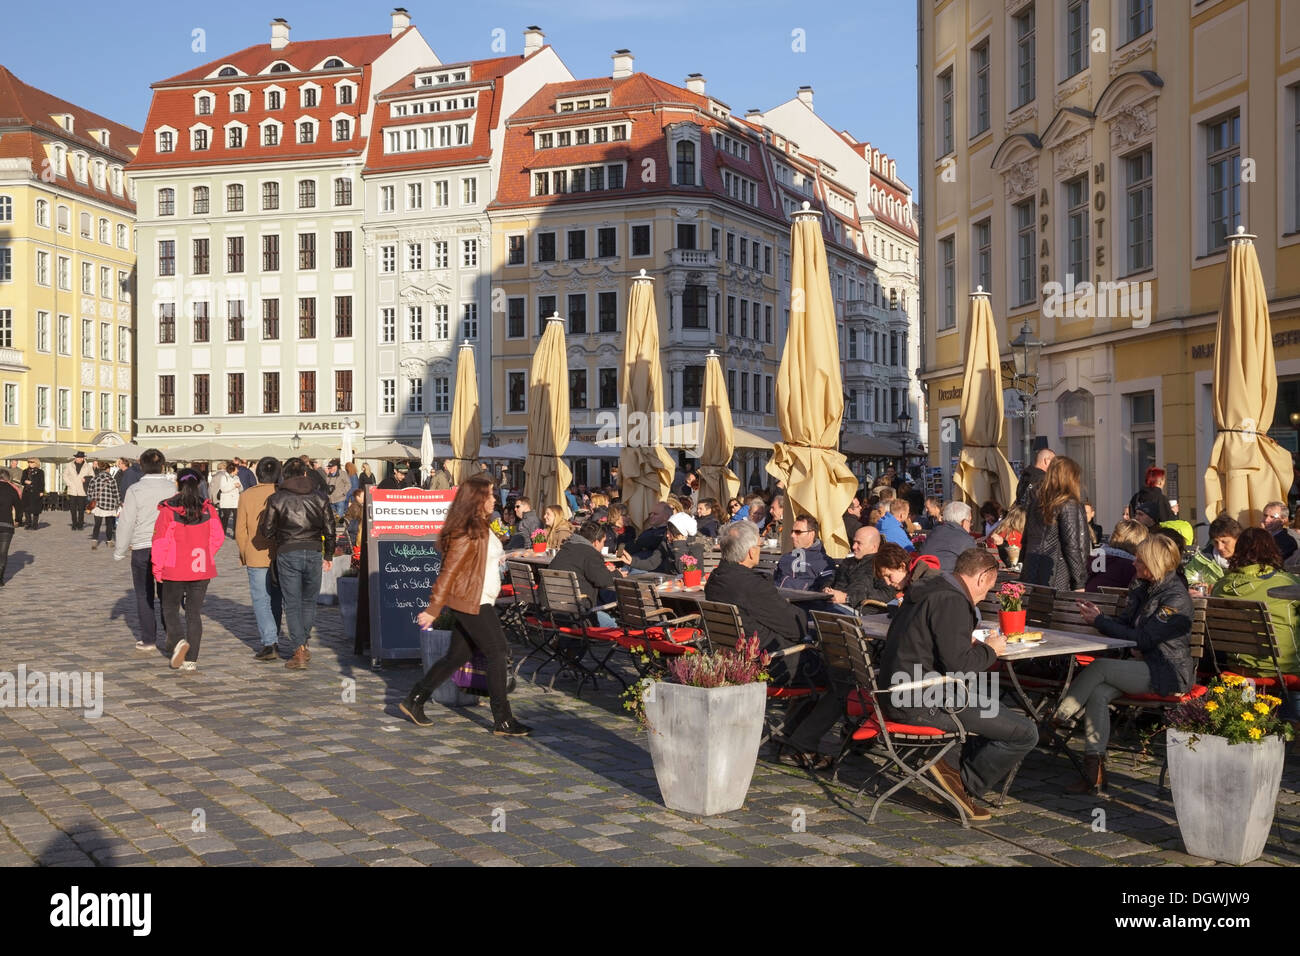 An der Frauenkirche square with restaurants and old buildings, Dresden, Saxony, Germany Stock Photo